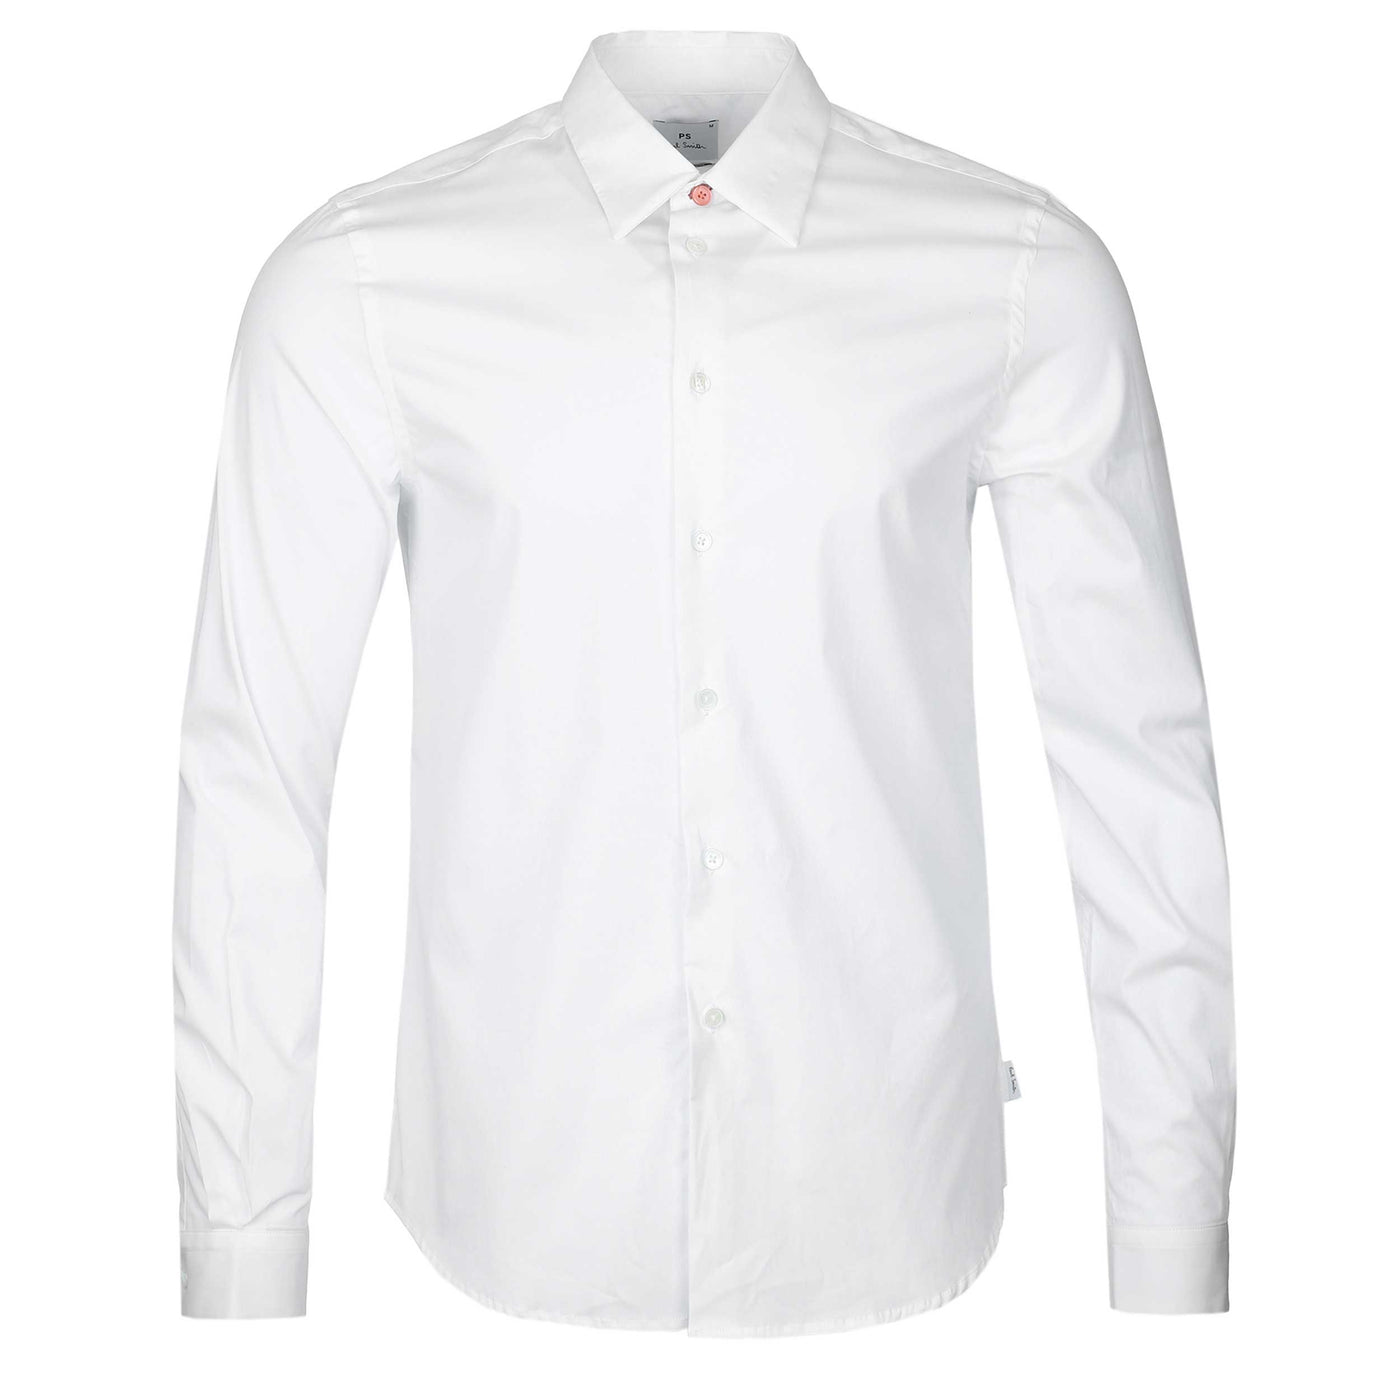 Paul Smith Tailored Fit Shirt in White